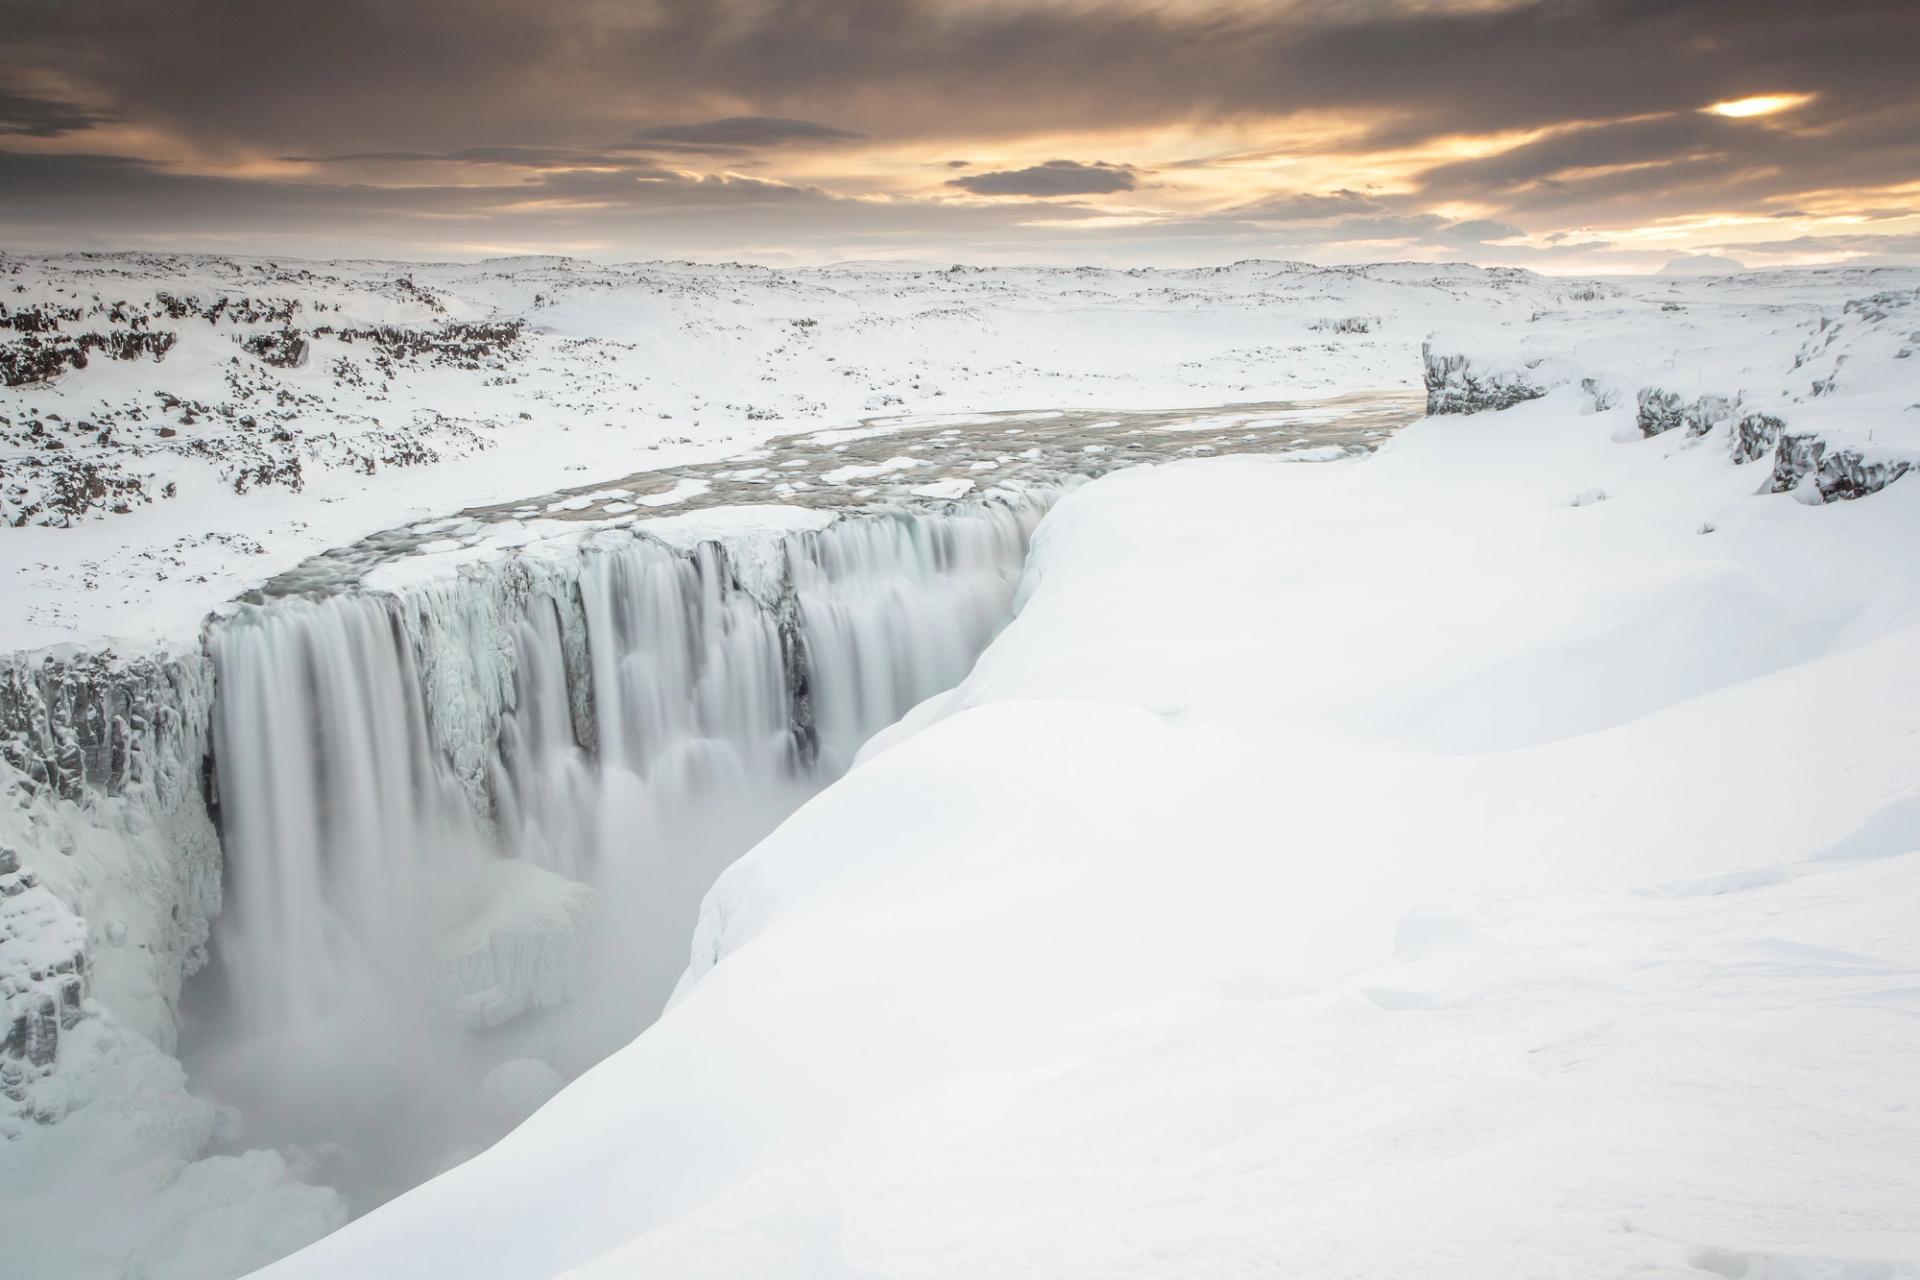 Dettifoss waterfall in Iceland during winter, surrounded by snow and ice.